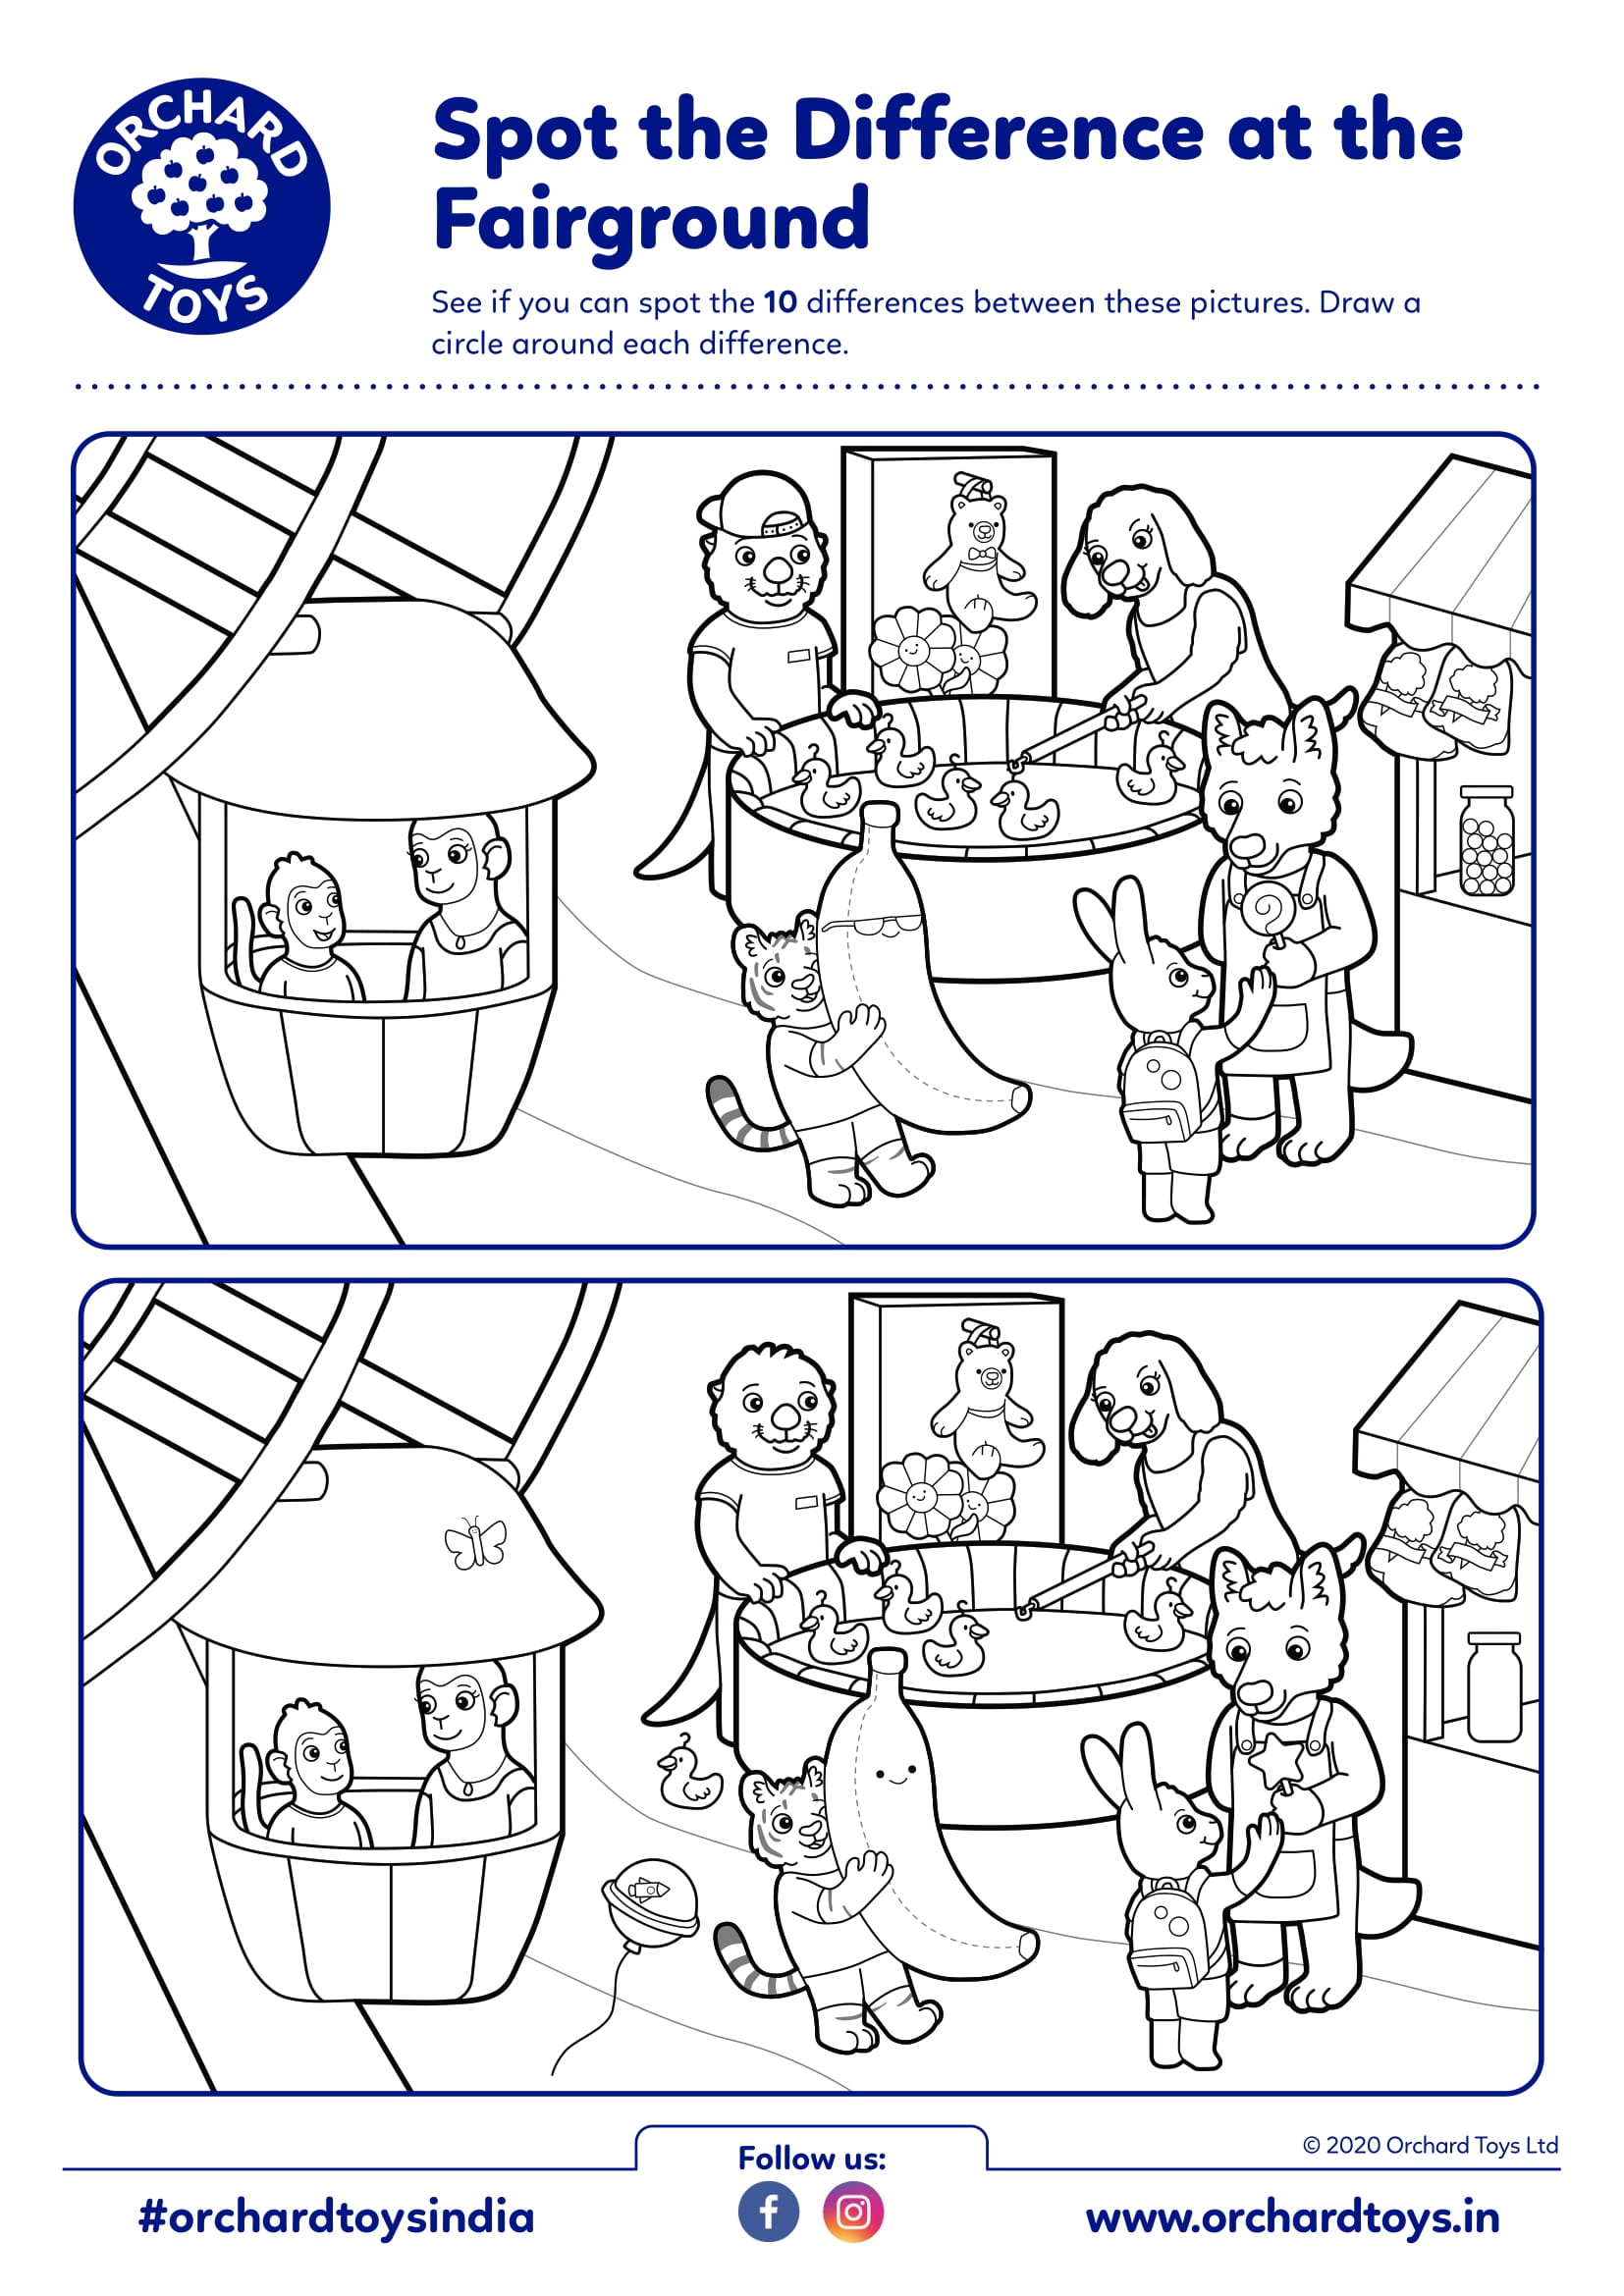 Spot the Difference Fairground Activity Sheet